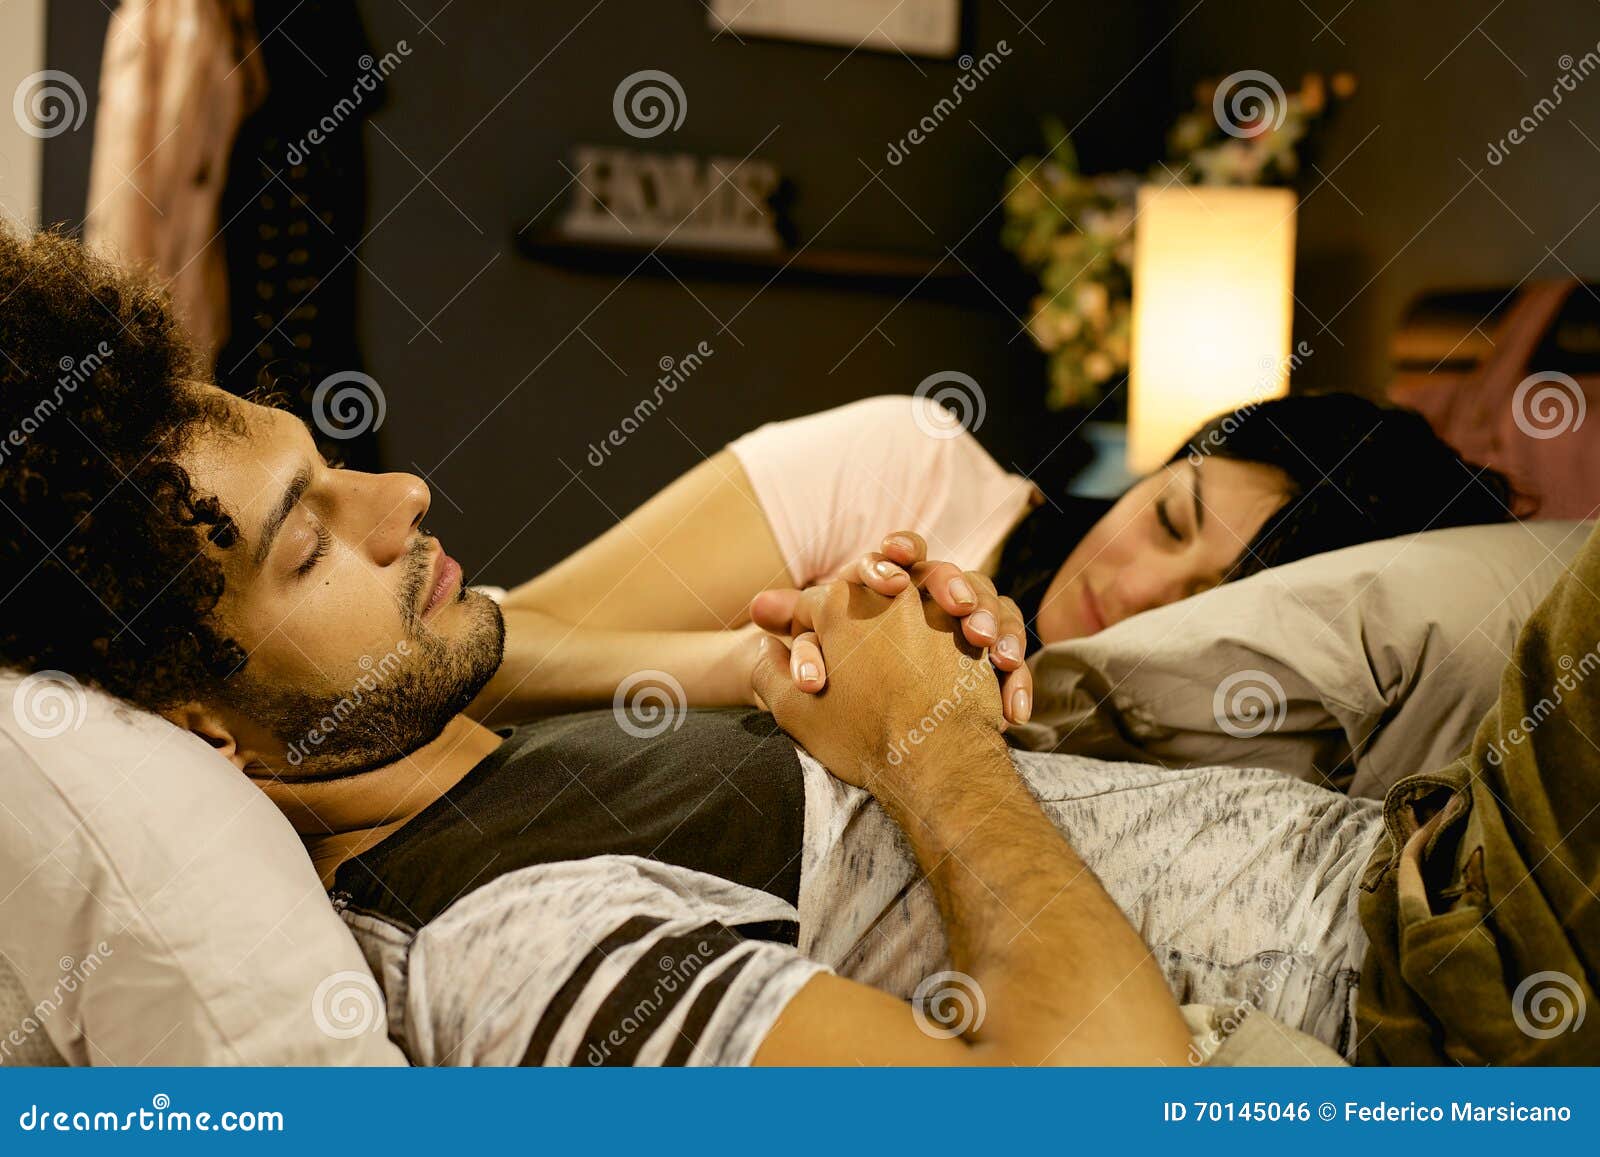 Cute Couple in Love Sleeping in Bed Holding Hands at Home at Night ...